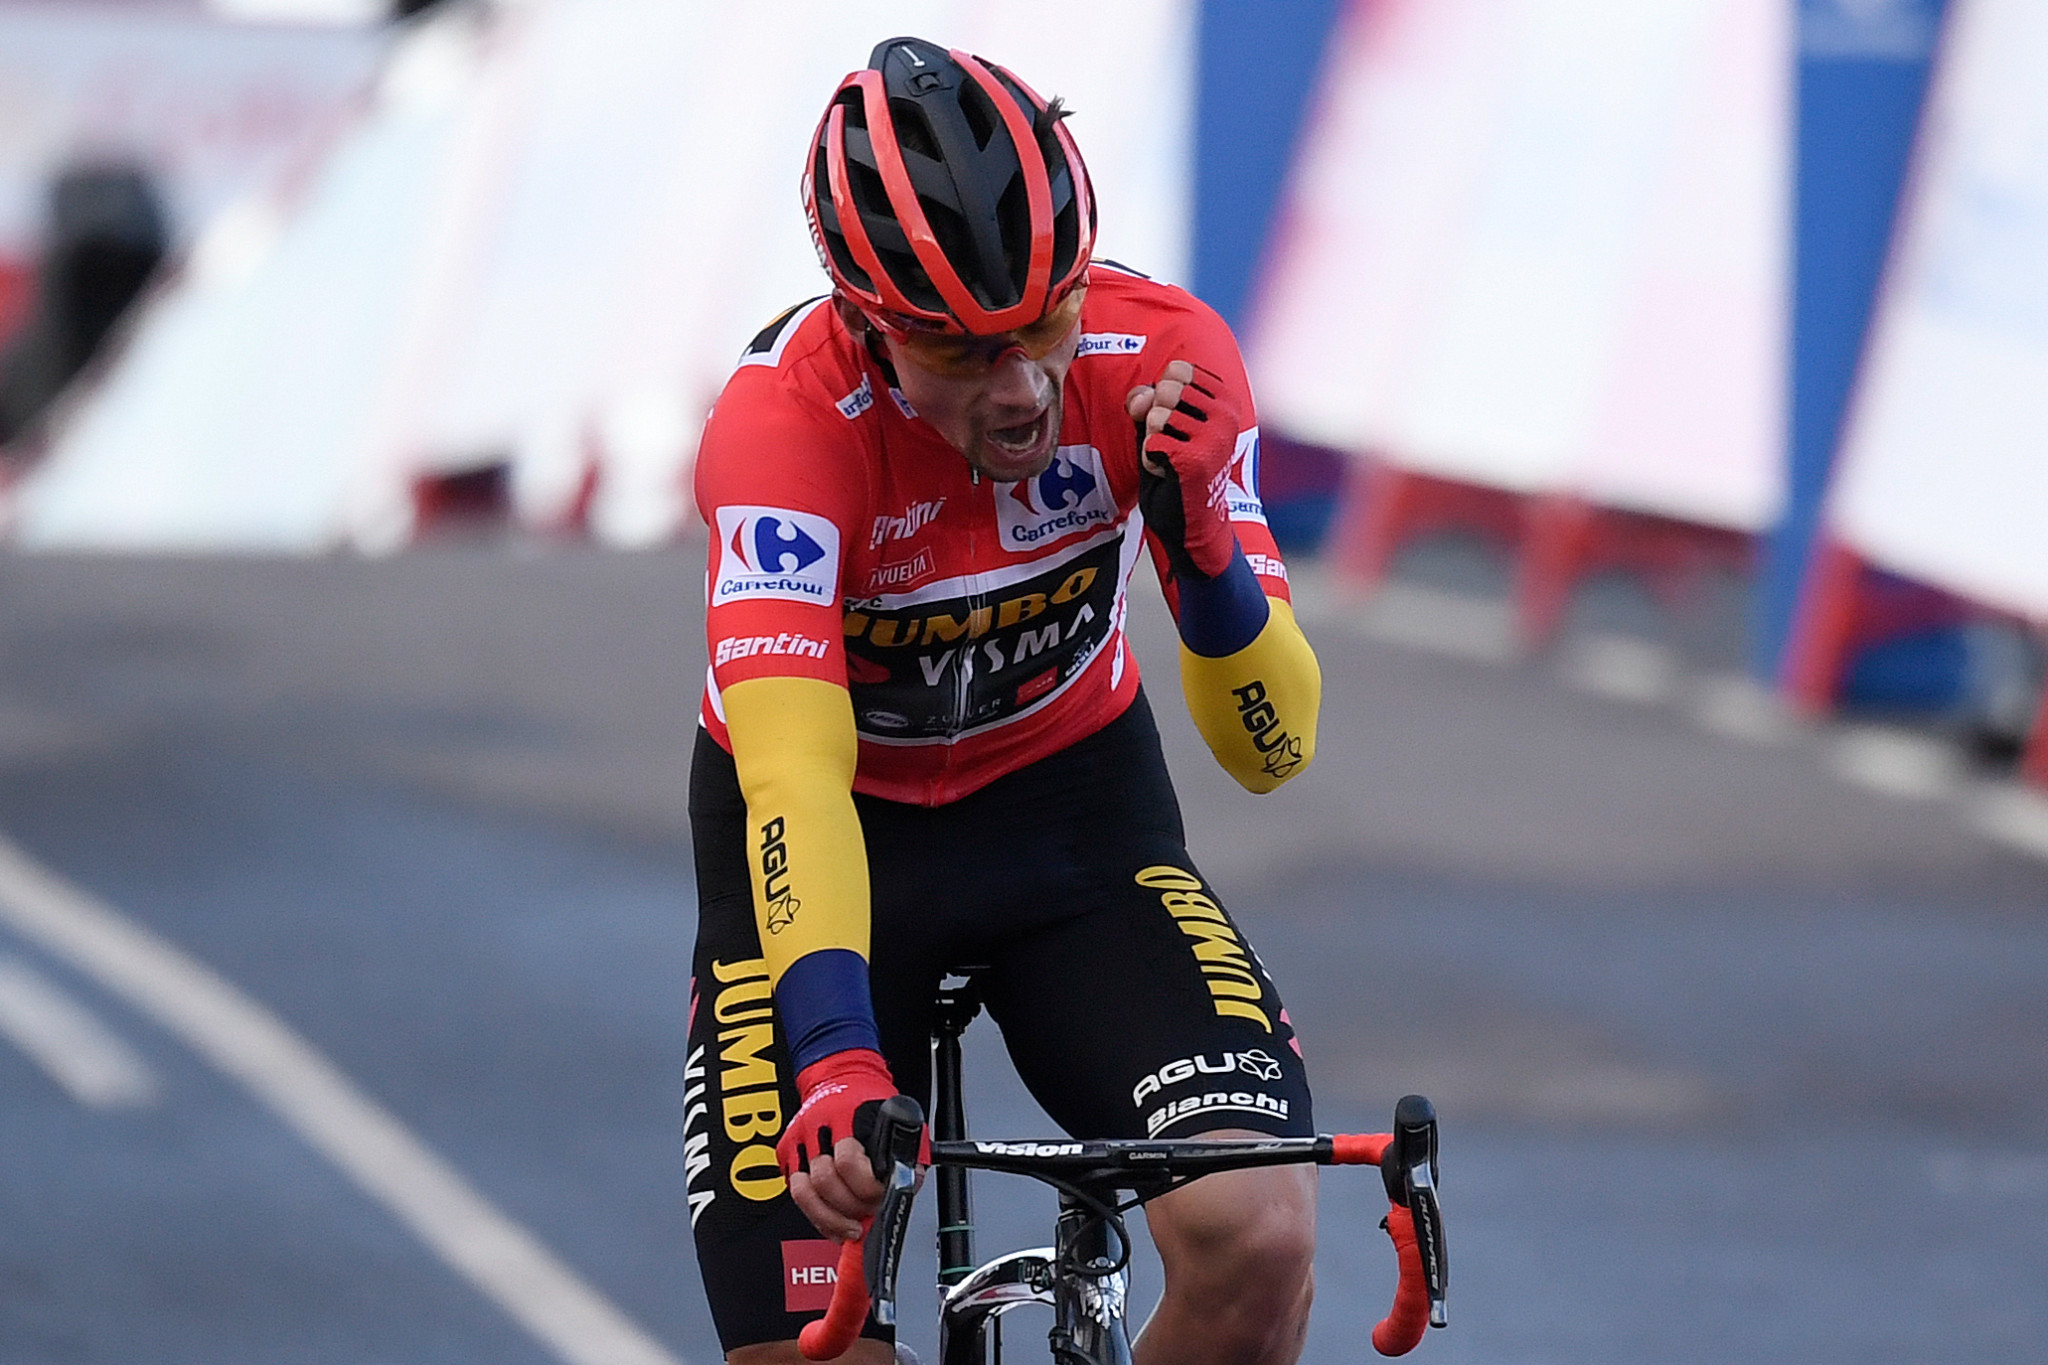 Roglič recovers from crash to win stage 11 of the Vuelta a España